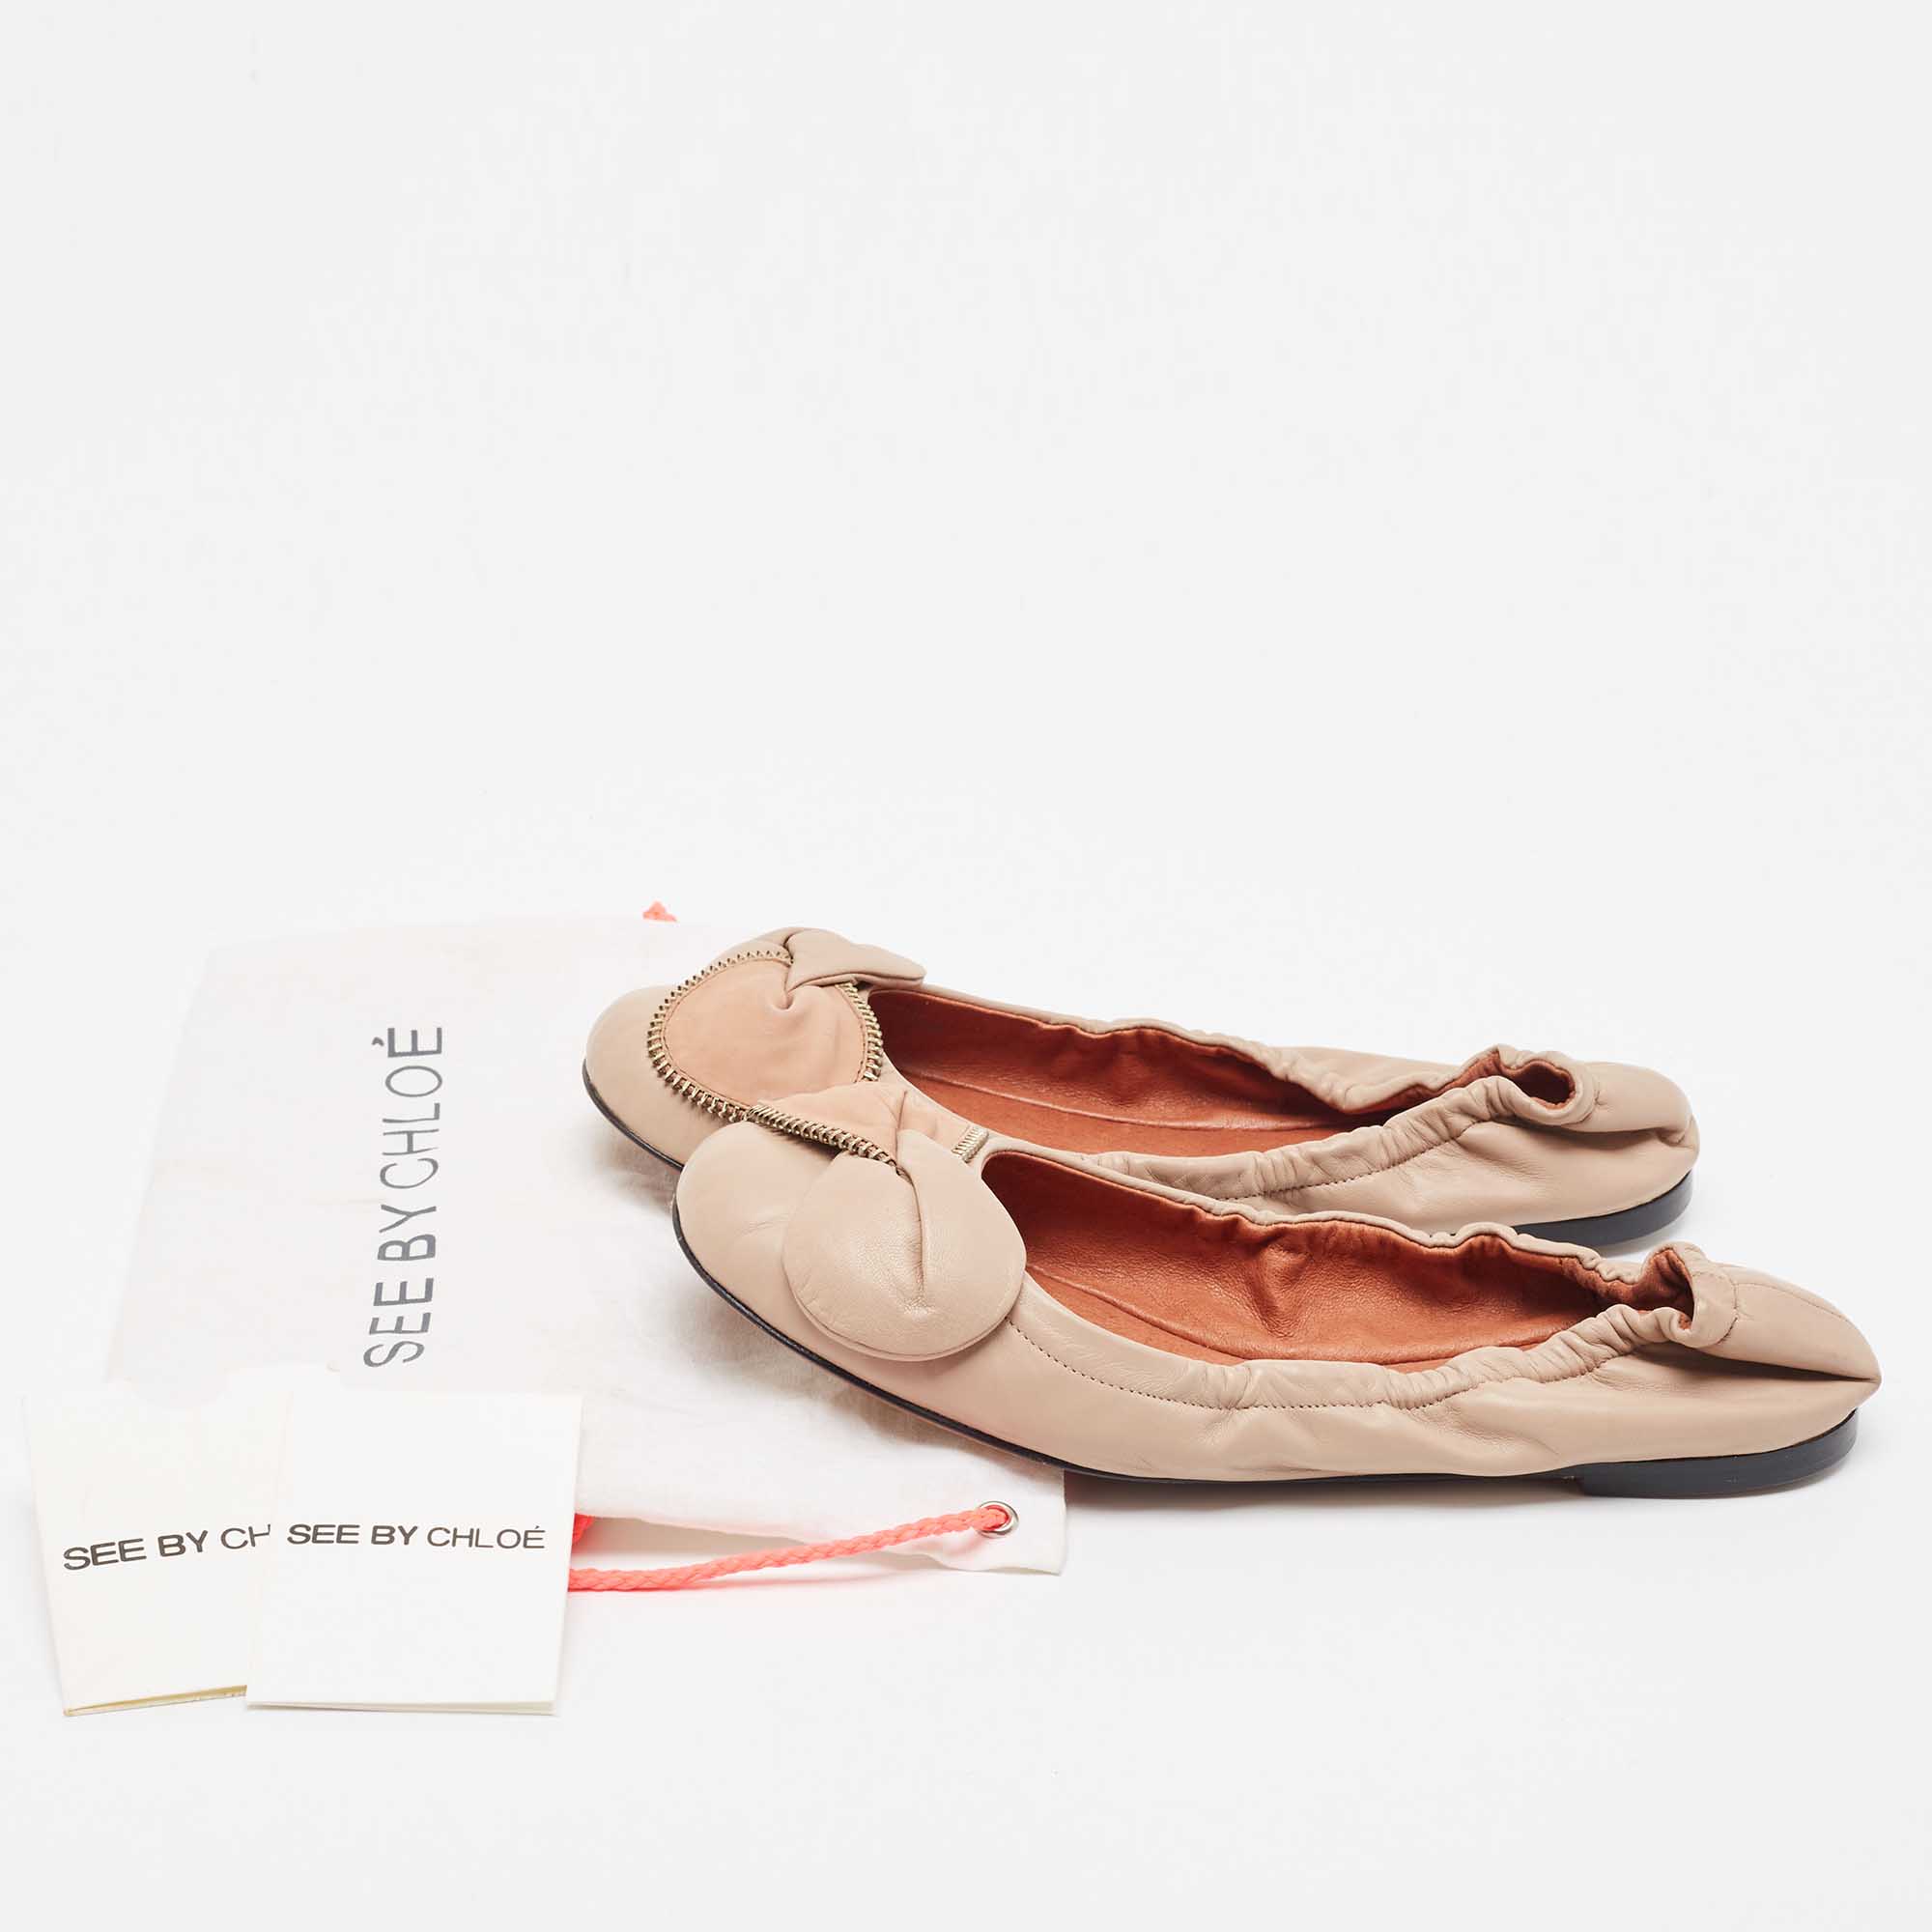 See By Chloe Beige Leather Scrunch Bow Ballet Flats Size 39.5